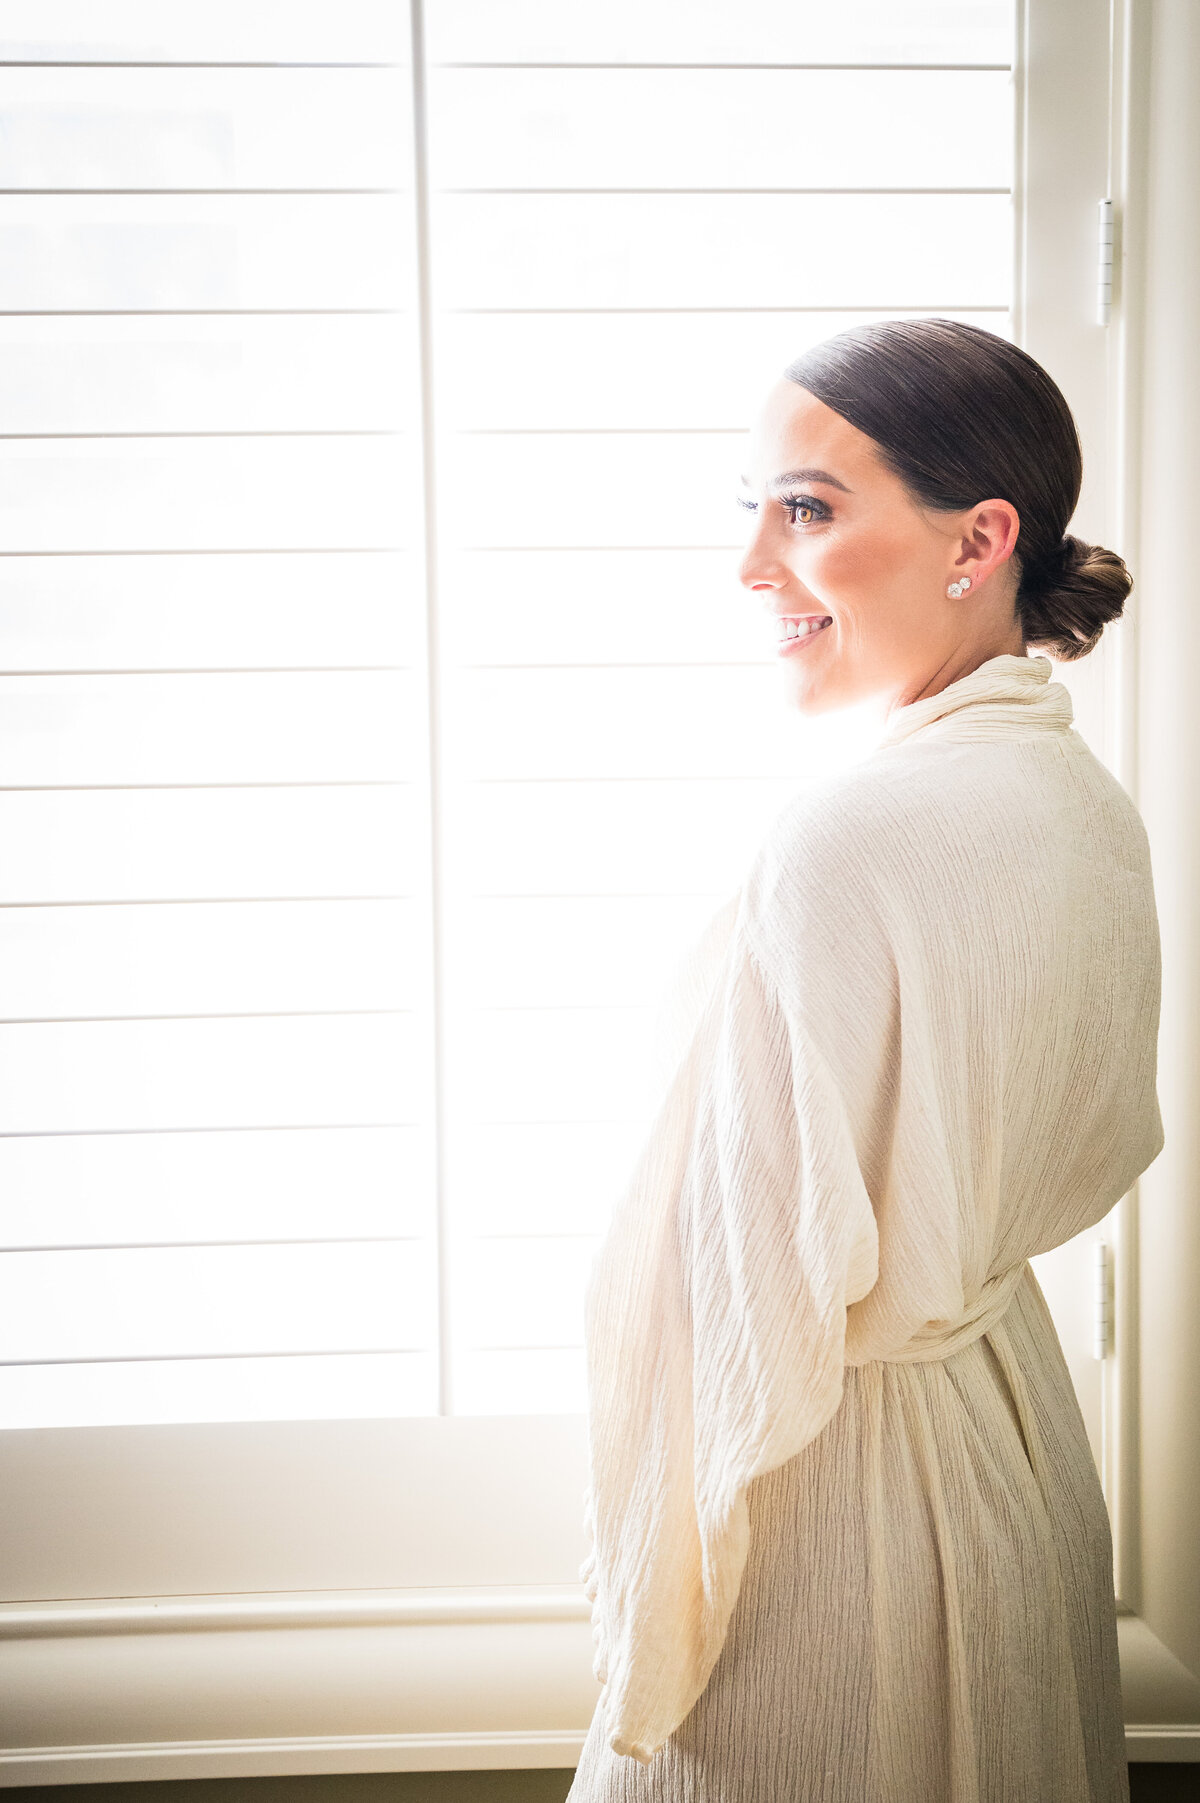 A candid shot of a bride in her getting ready robe smiling at something off camera.